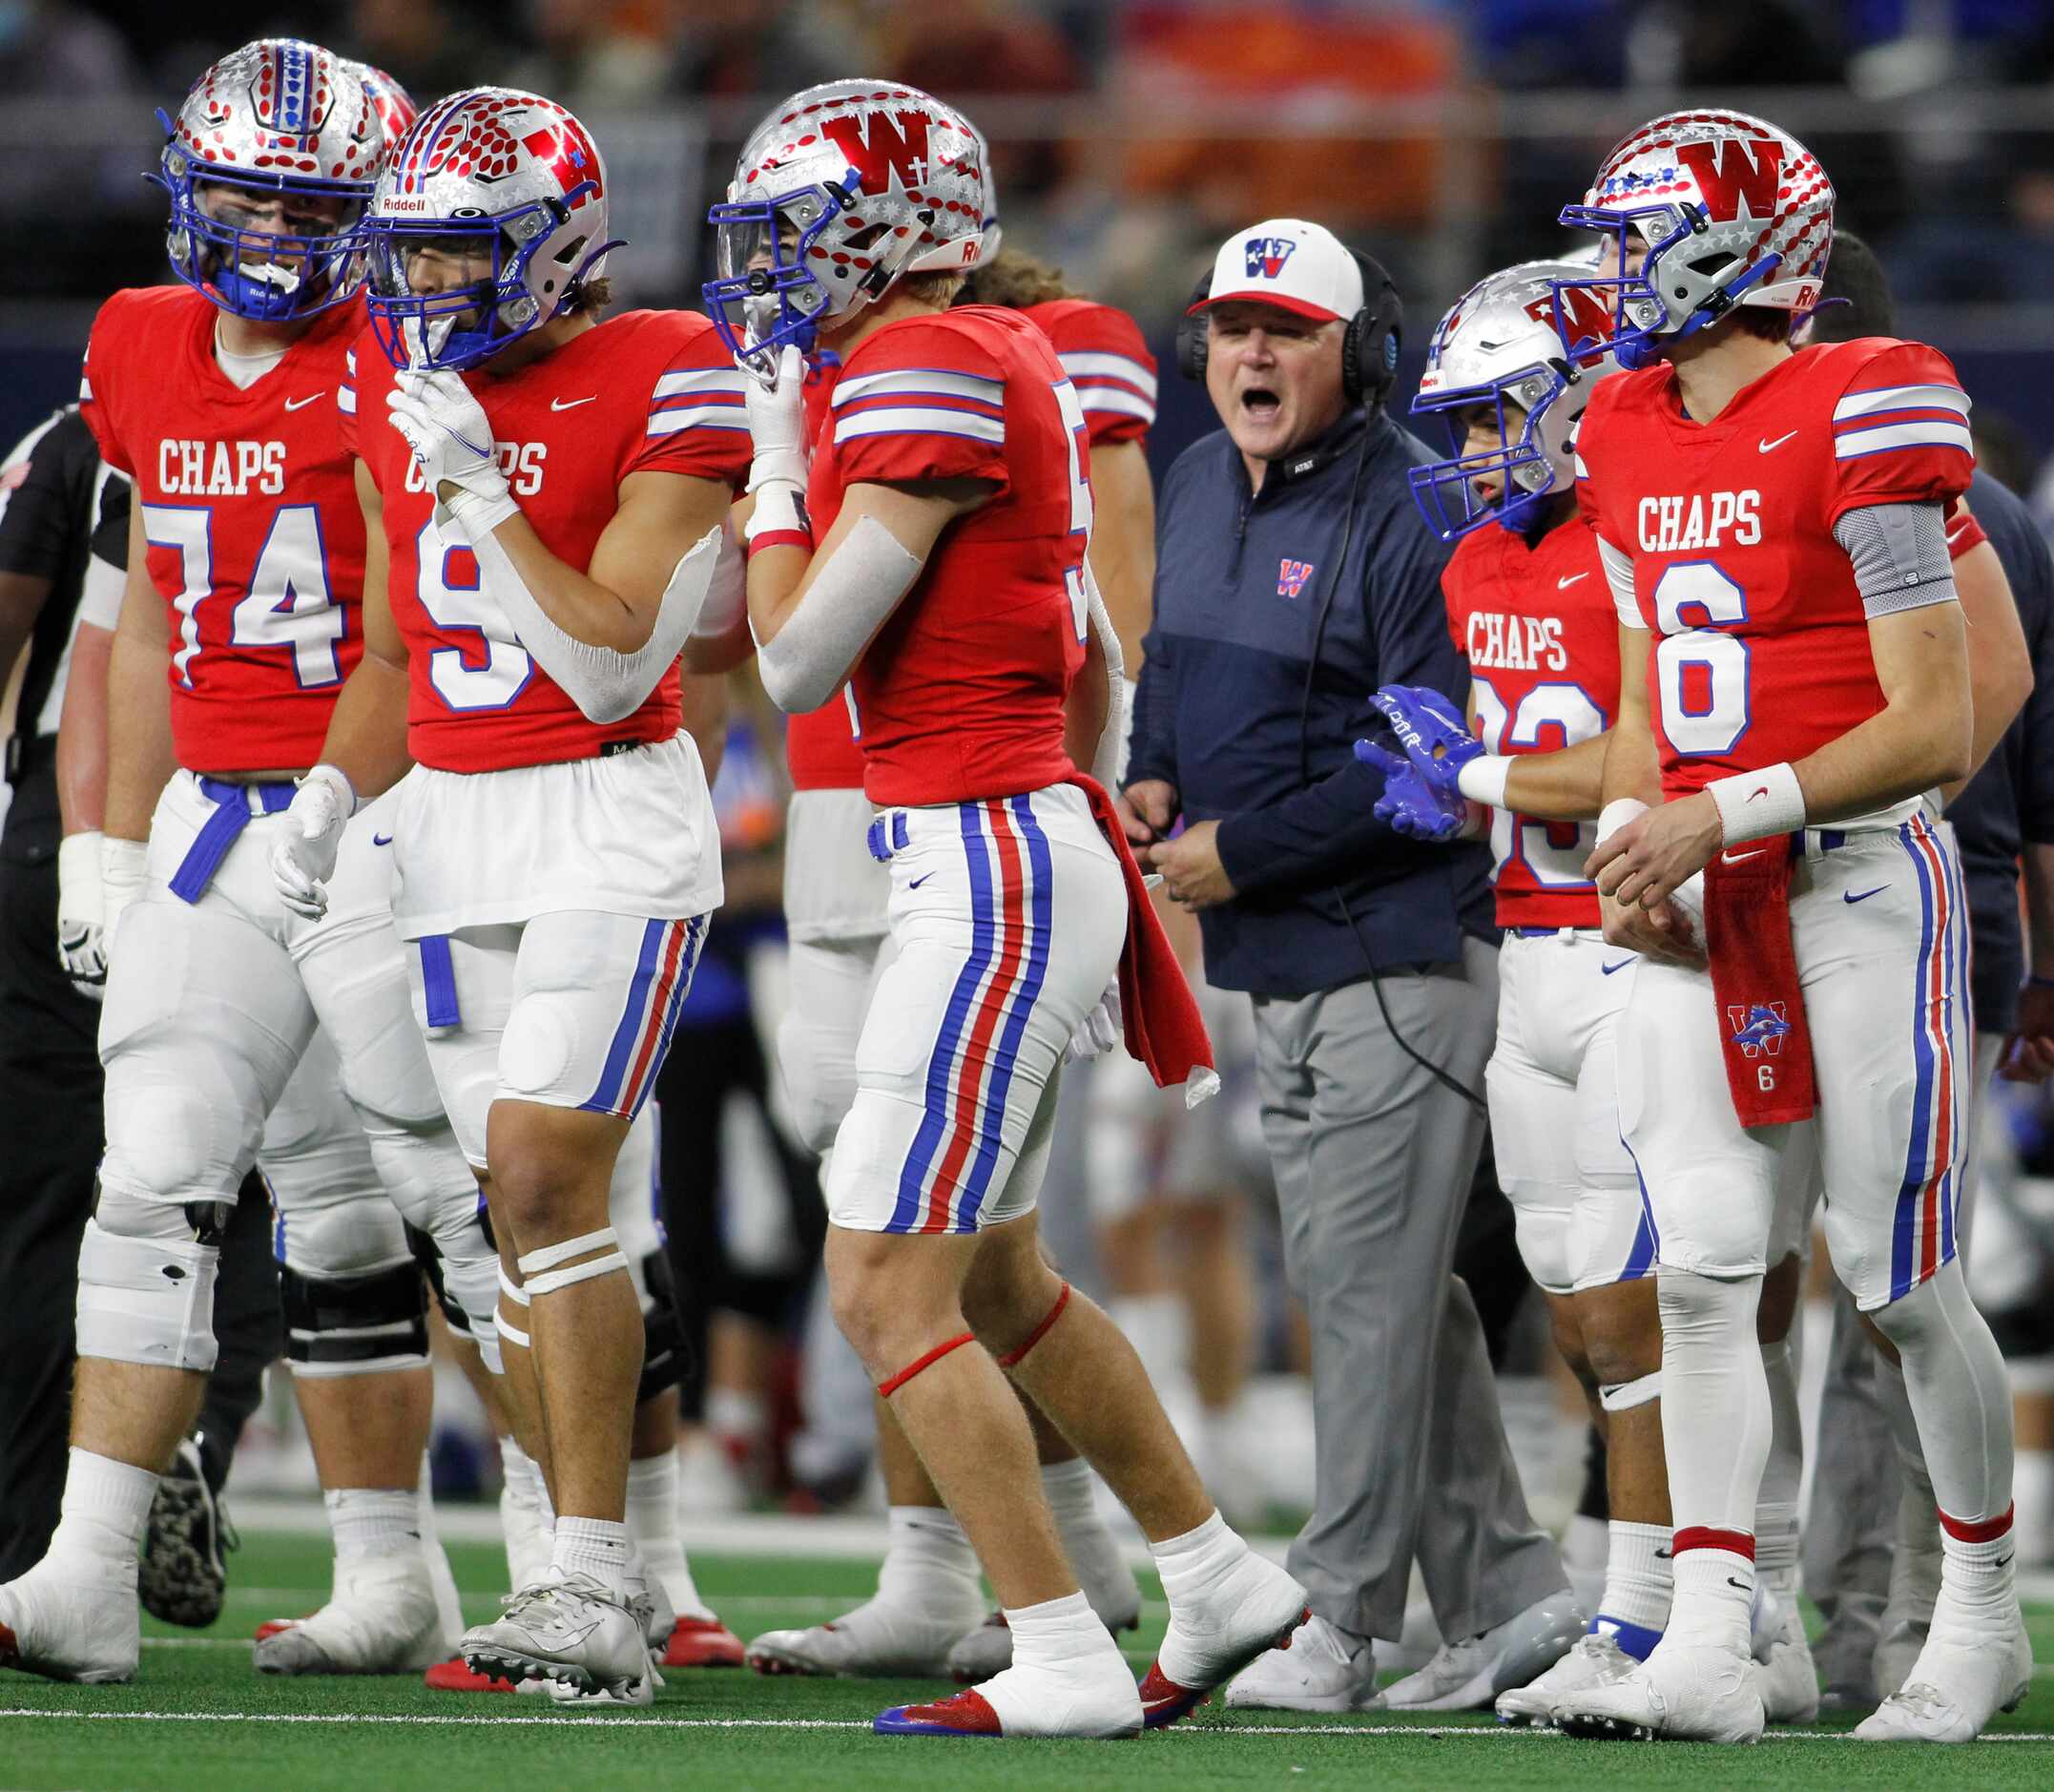 Austin Westlake head coach Todd Dodge conveys wisdom to his players breaking huddle from a...